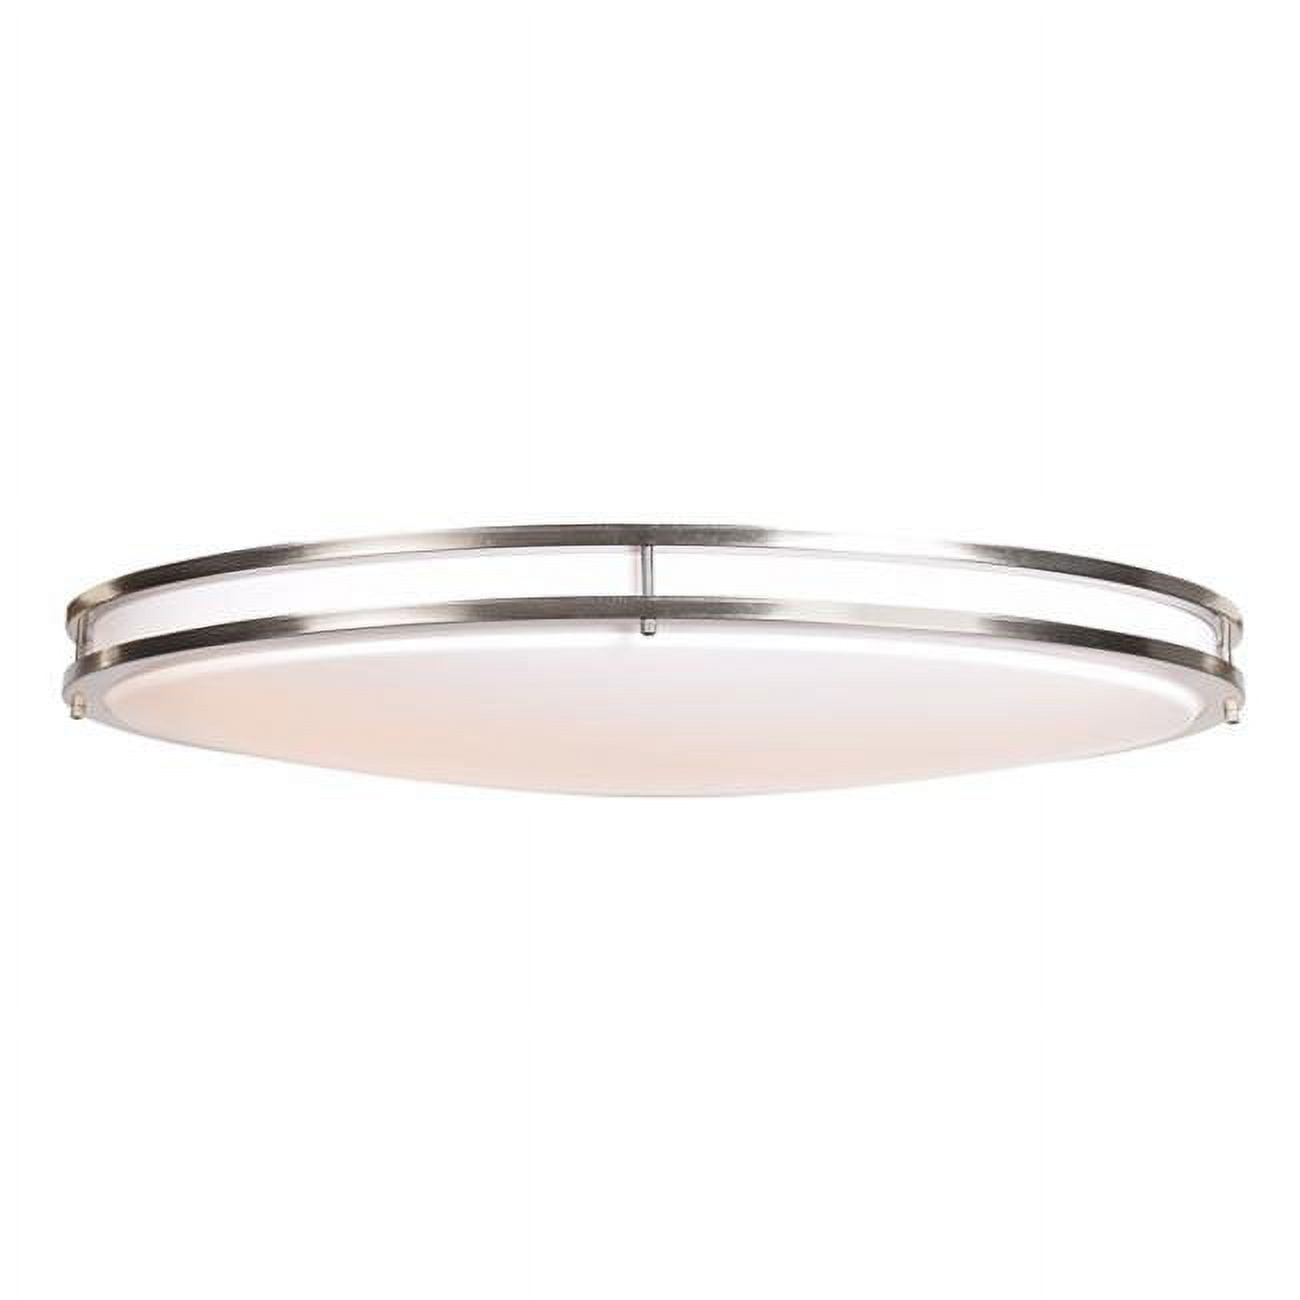 Picture of Access lighting 20468LEDD-CH-ACR 32.50 x 18.25 x 5 in. Solero Oval Oval Flush Mount&#44; Chrome & Acrylic Lens